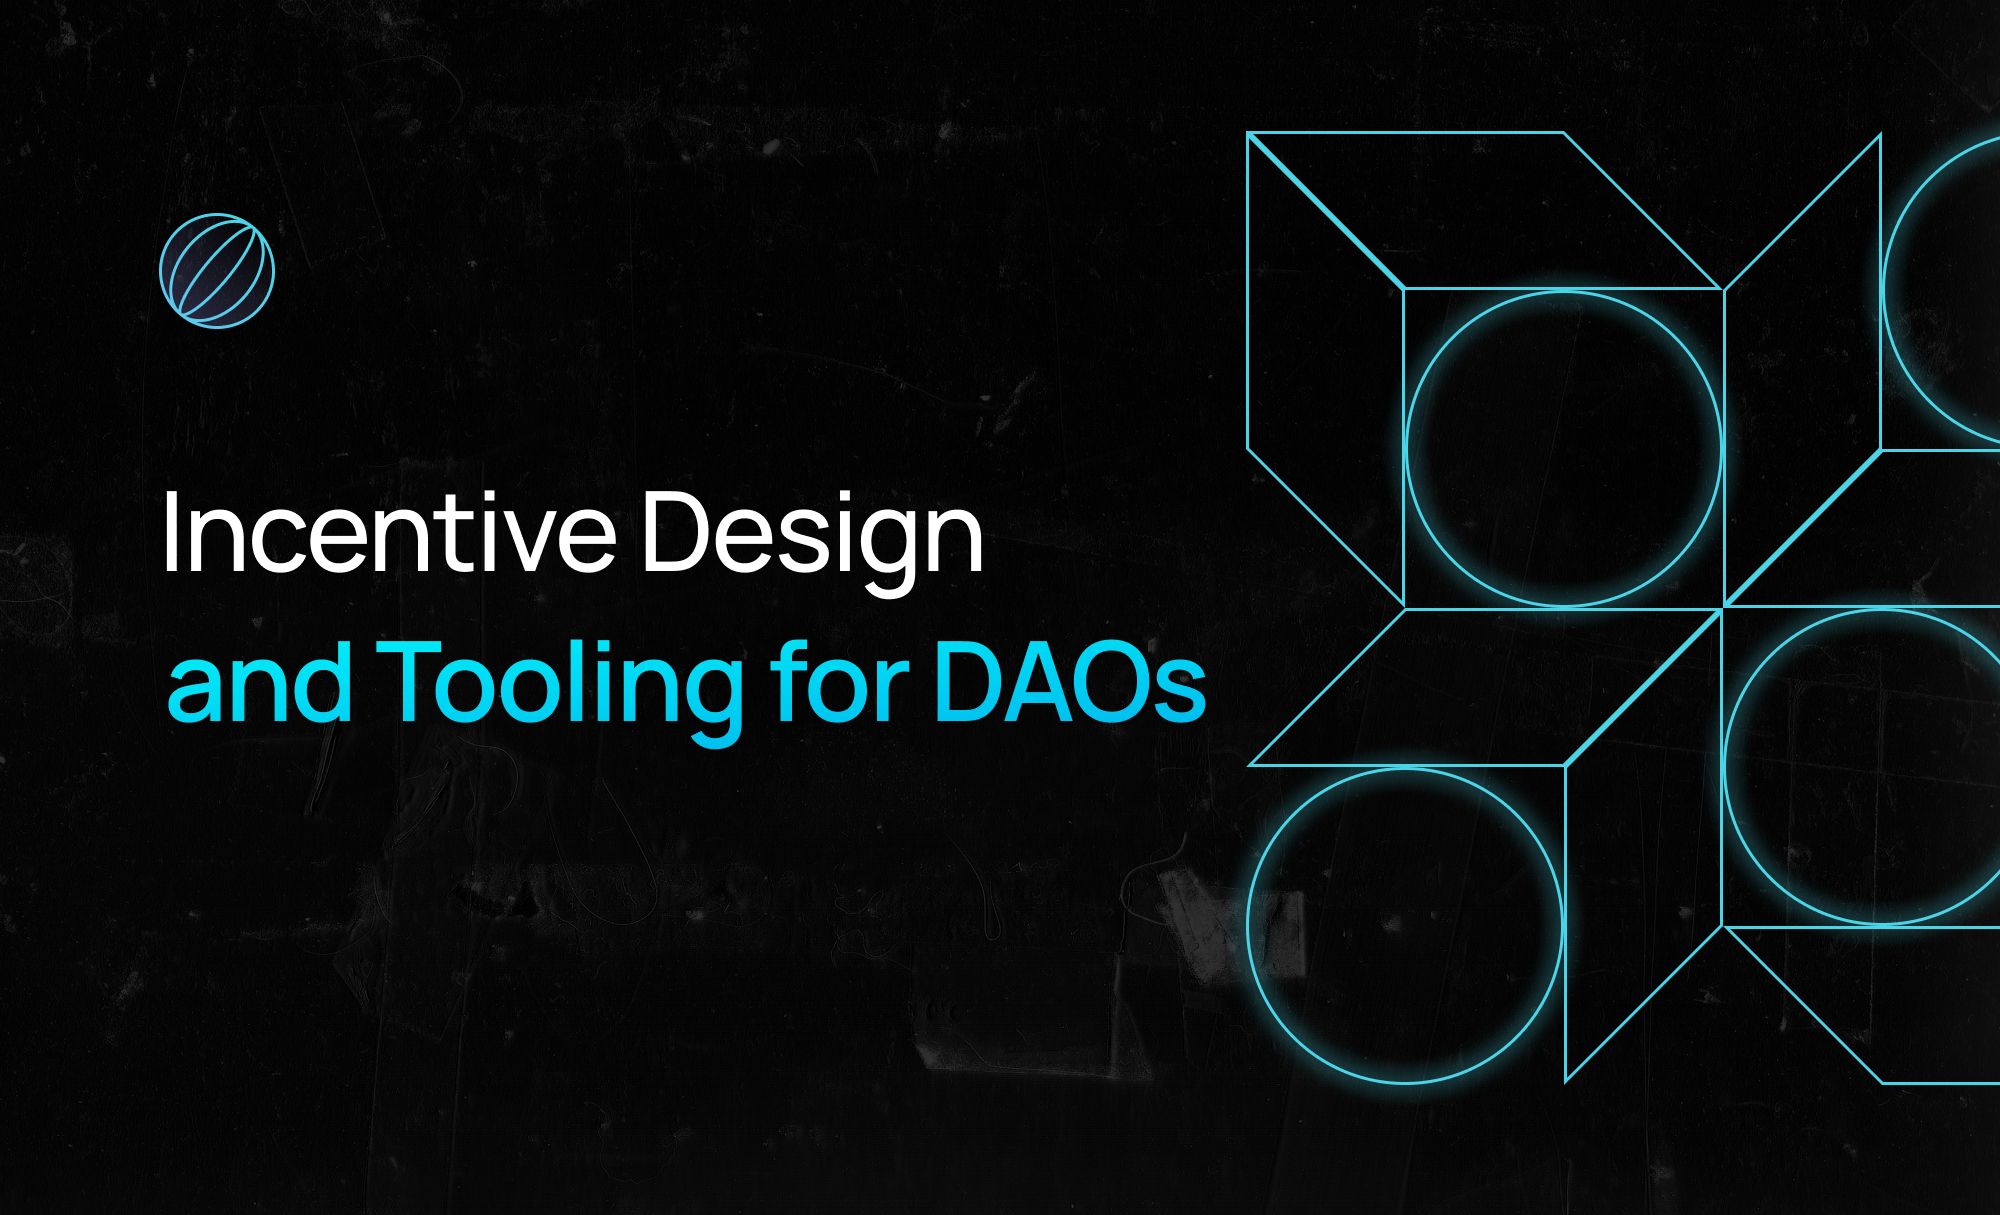 Incentive Design & Tooling for DAOs